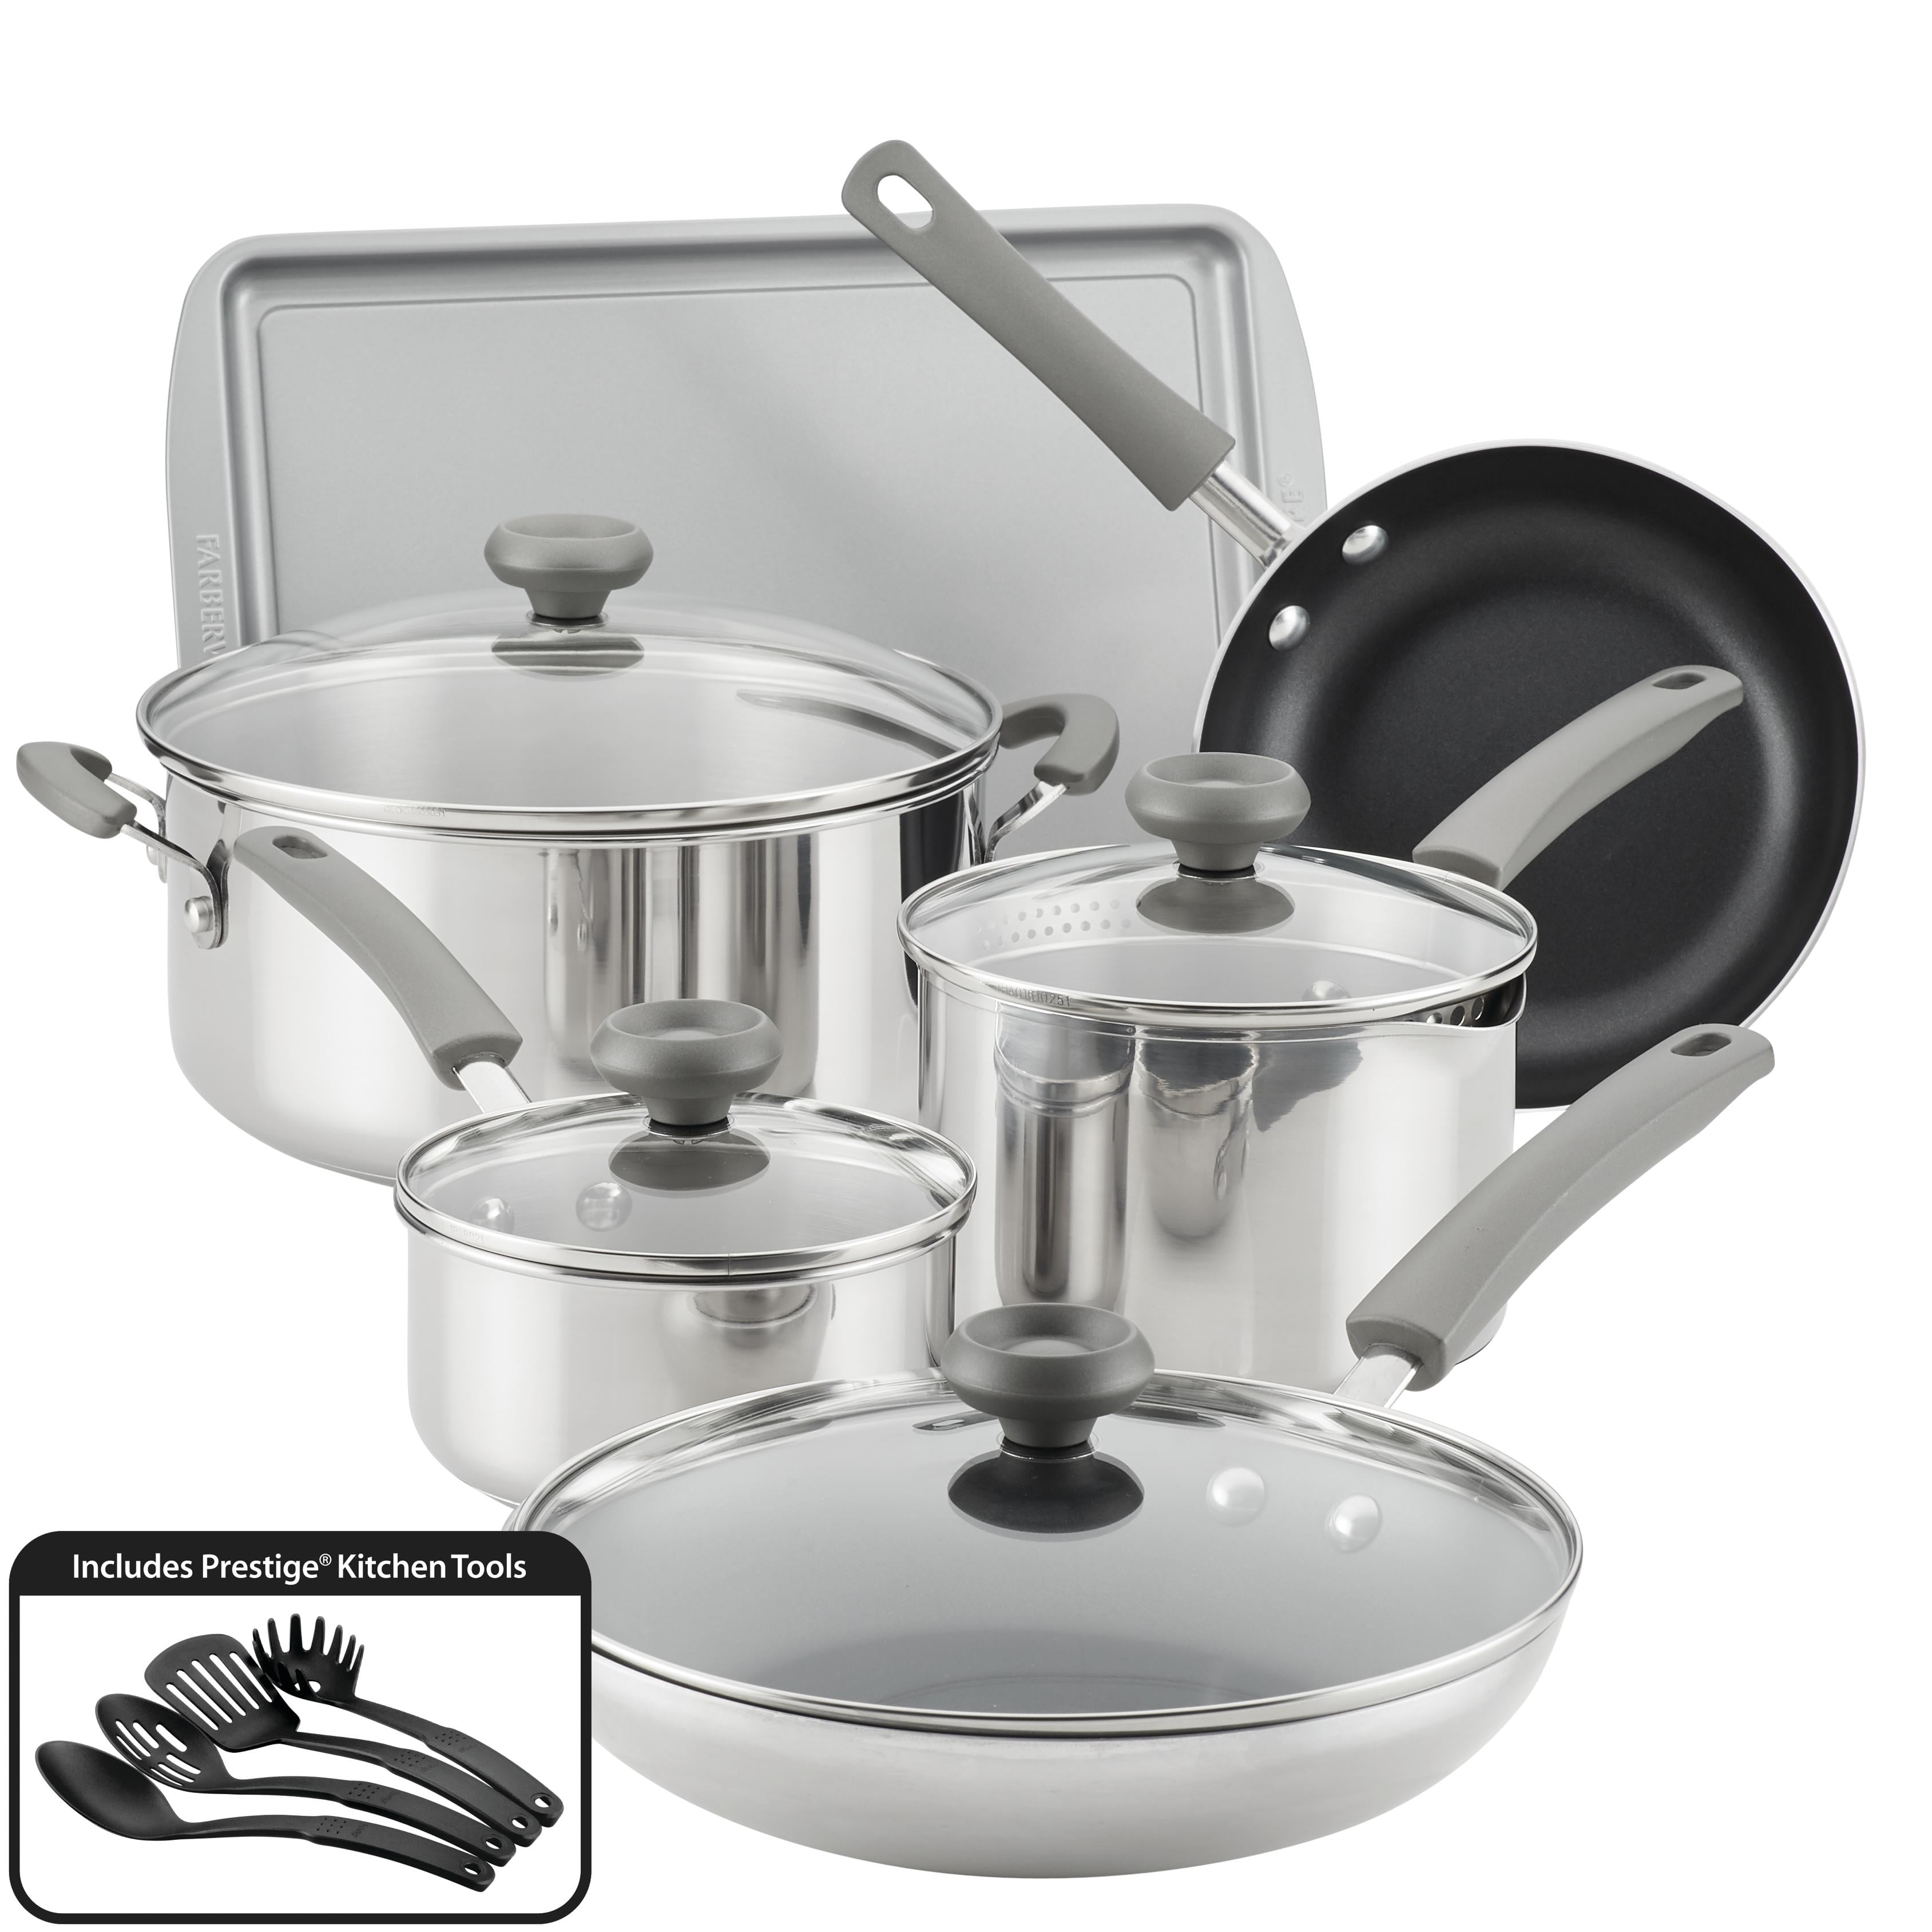  Farberware Classic Traditions Stainless Steel Cookware/Pots and  Pans Set, Good for All Stovetops (Gas, Glass Top, Electric & Induction), 14  Piece - Silver: Home & Kitchen